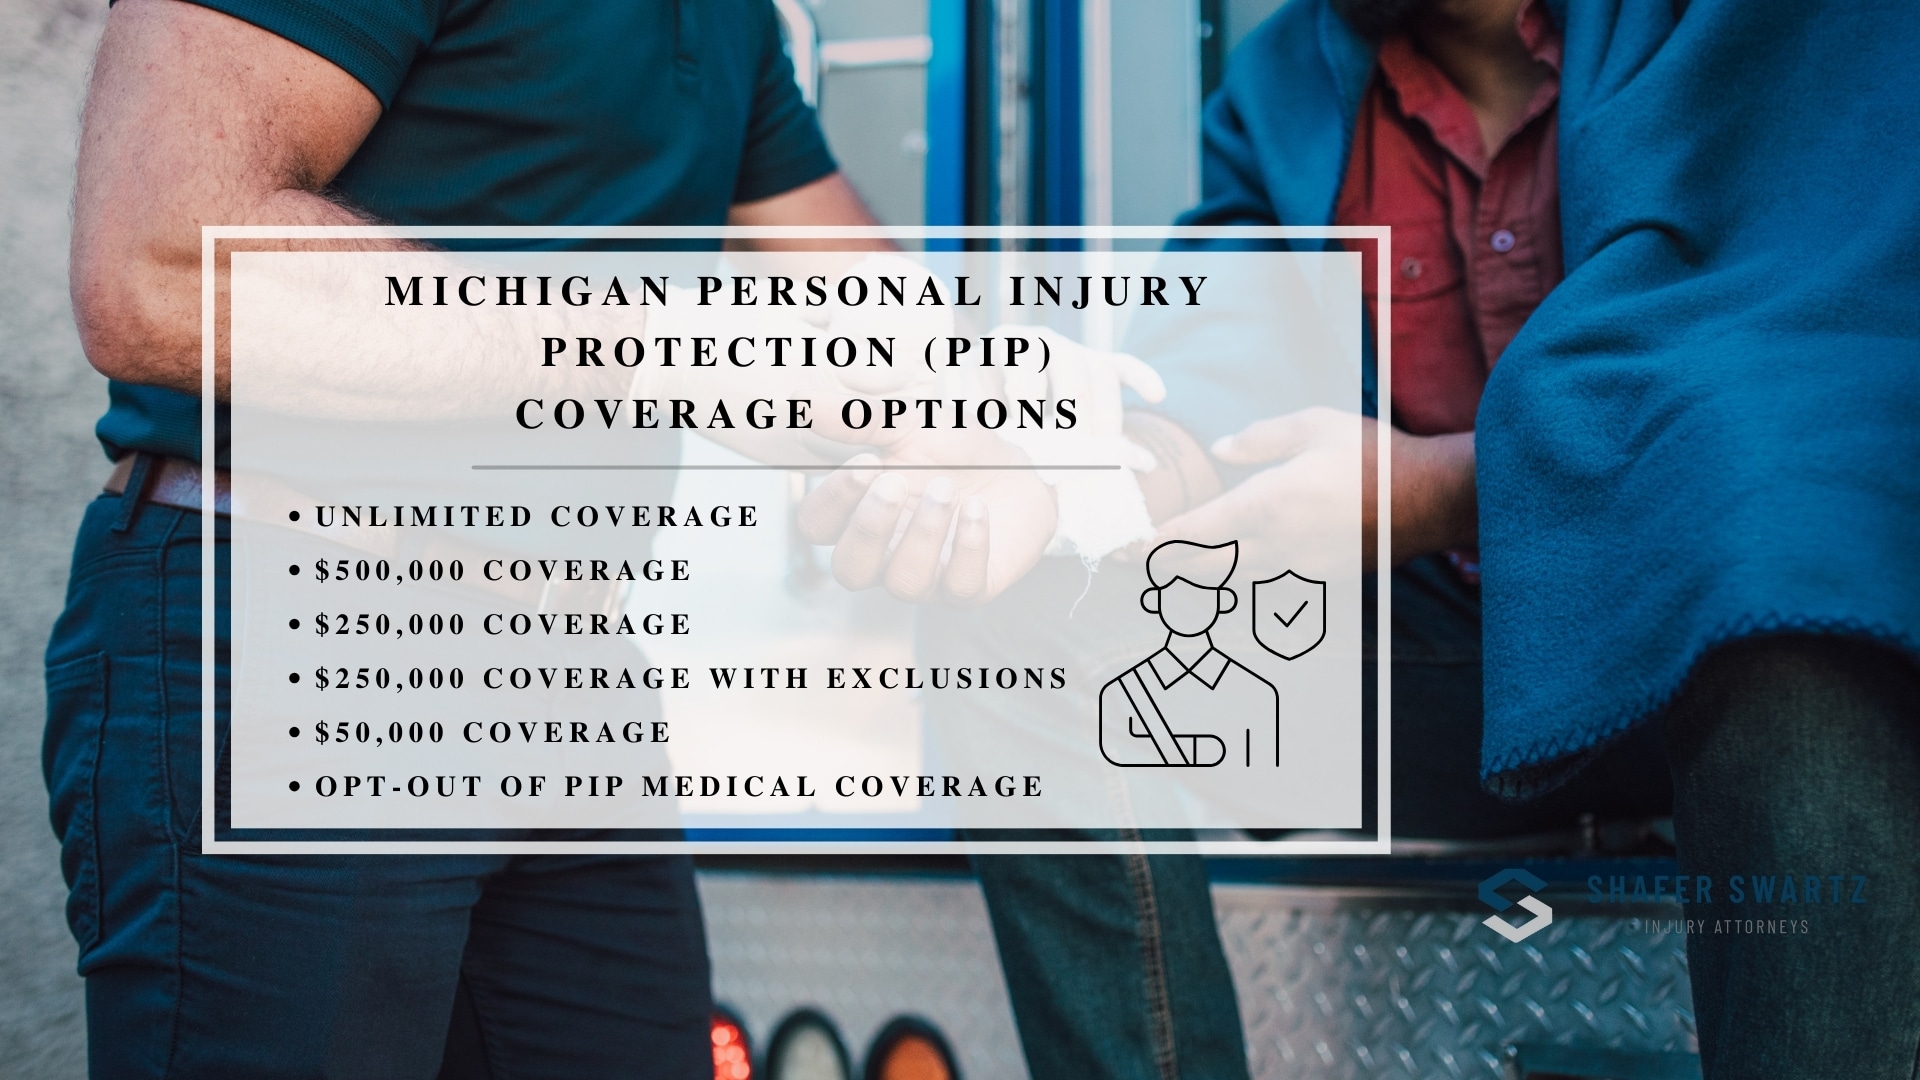 Infographic image of Michigan personal injury protection (PIP) coverage options